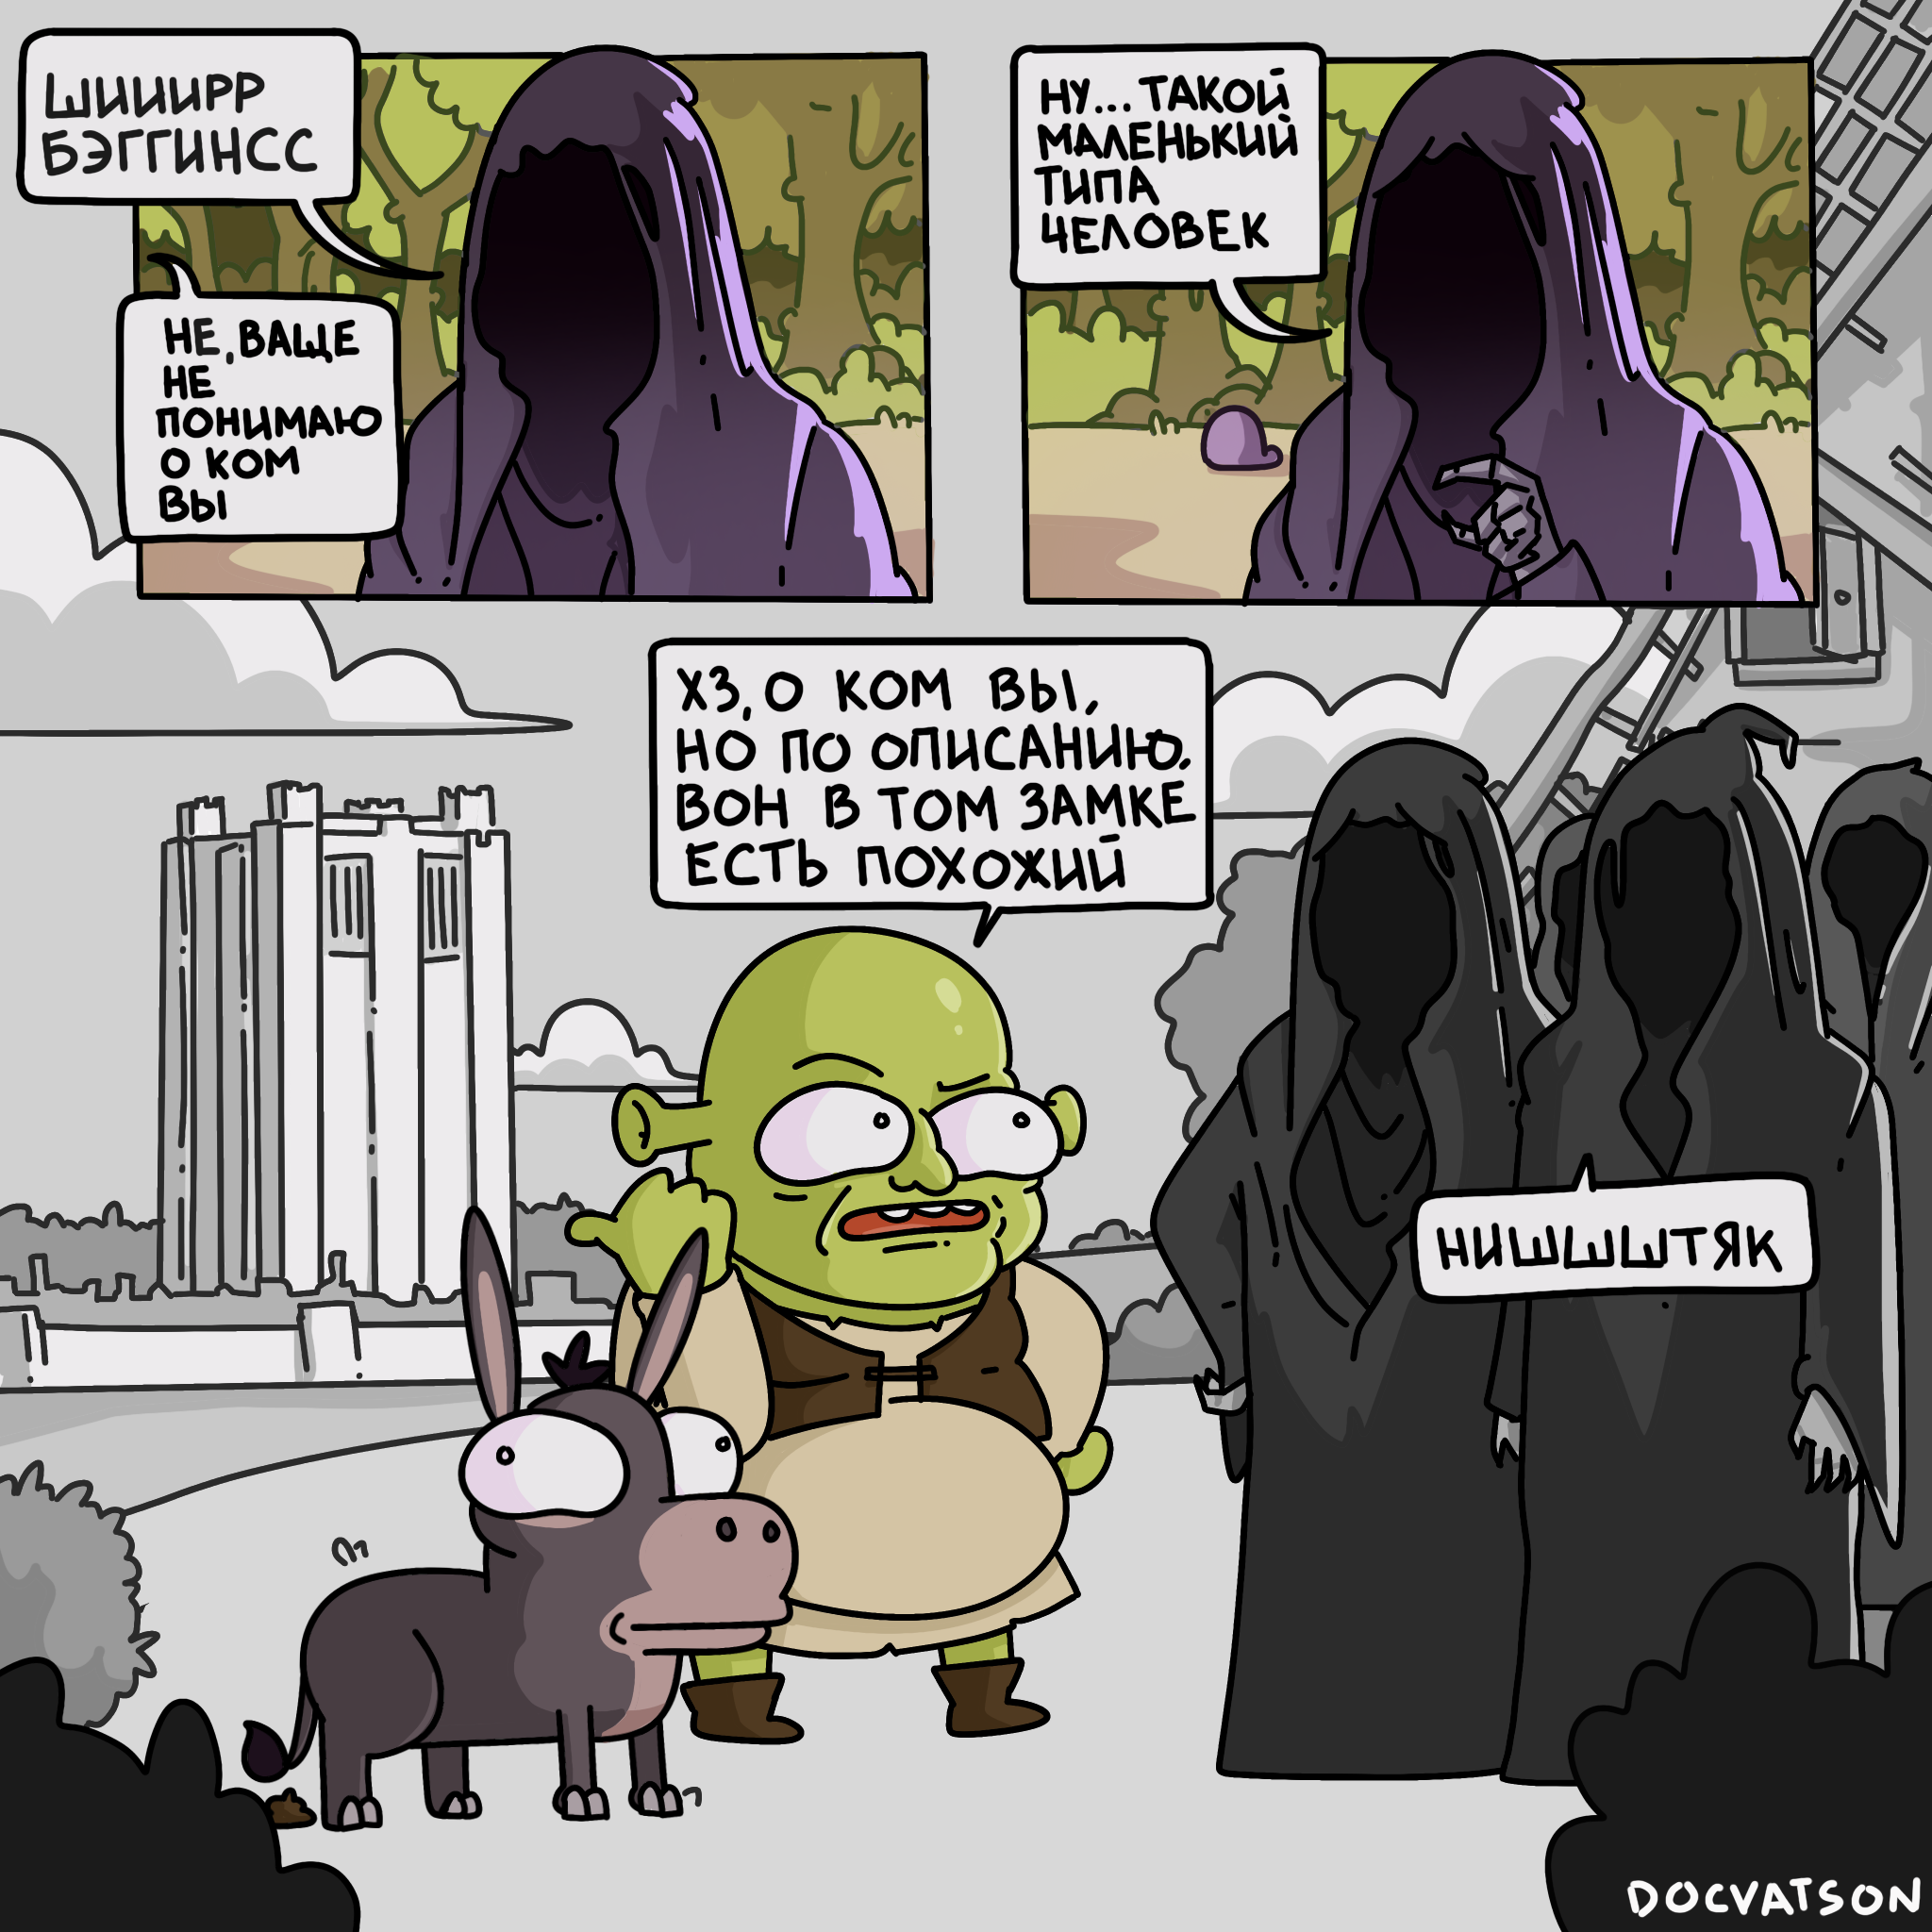 Post #11561743 - My, Humor, Comics, Suddenly, Expectation and reality, Irony, Shrek, Lord of the Rings, Strange humor, Caricature, Crossover